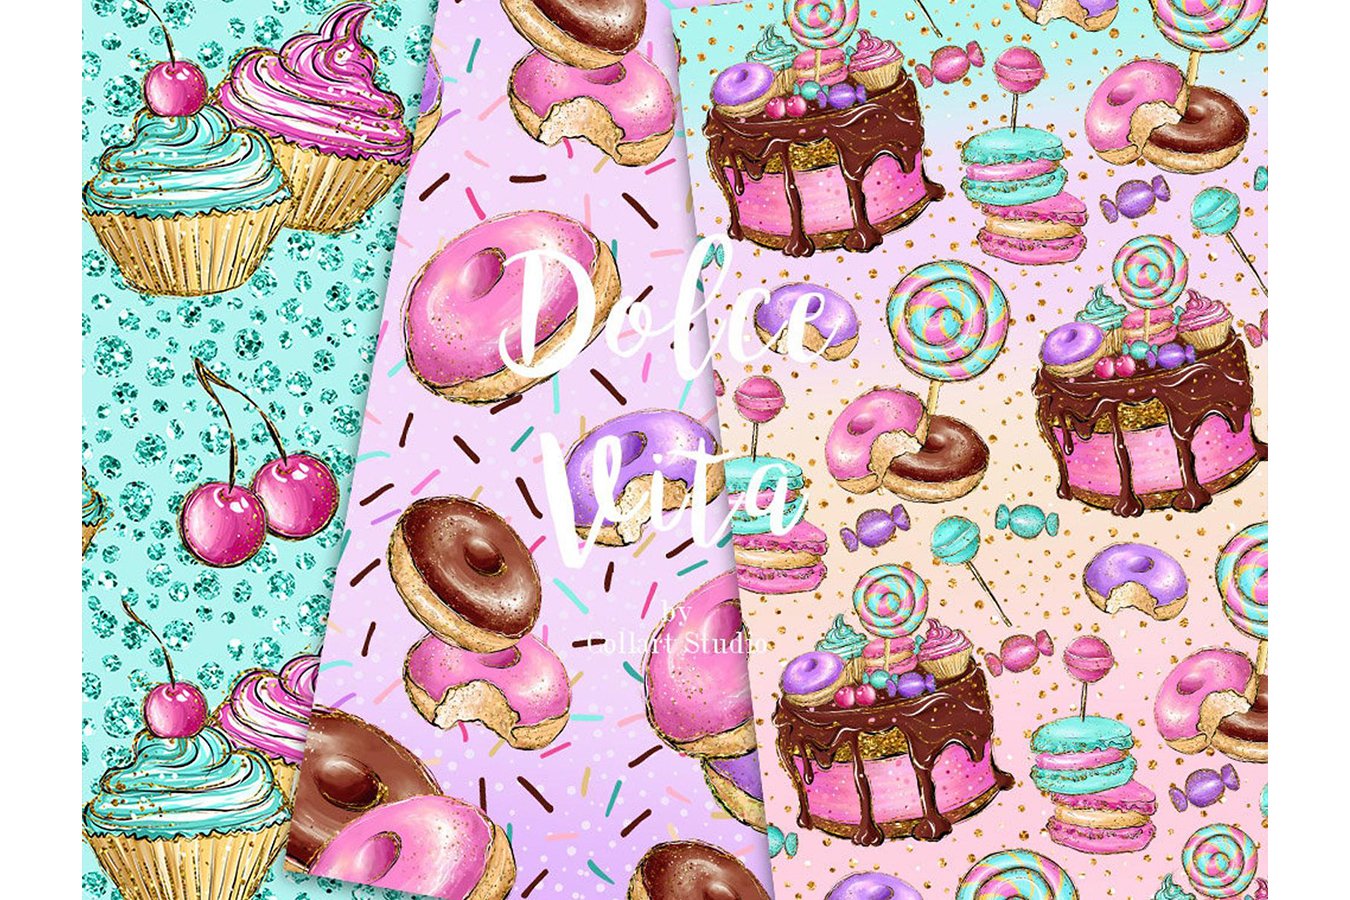 Tasty illustrations on multicolor backgrounds.